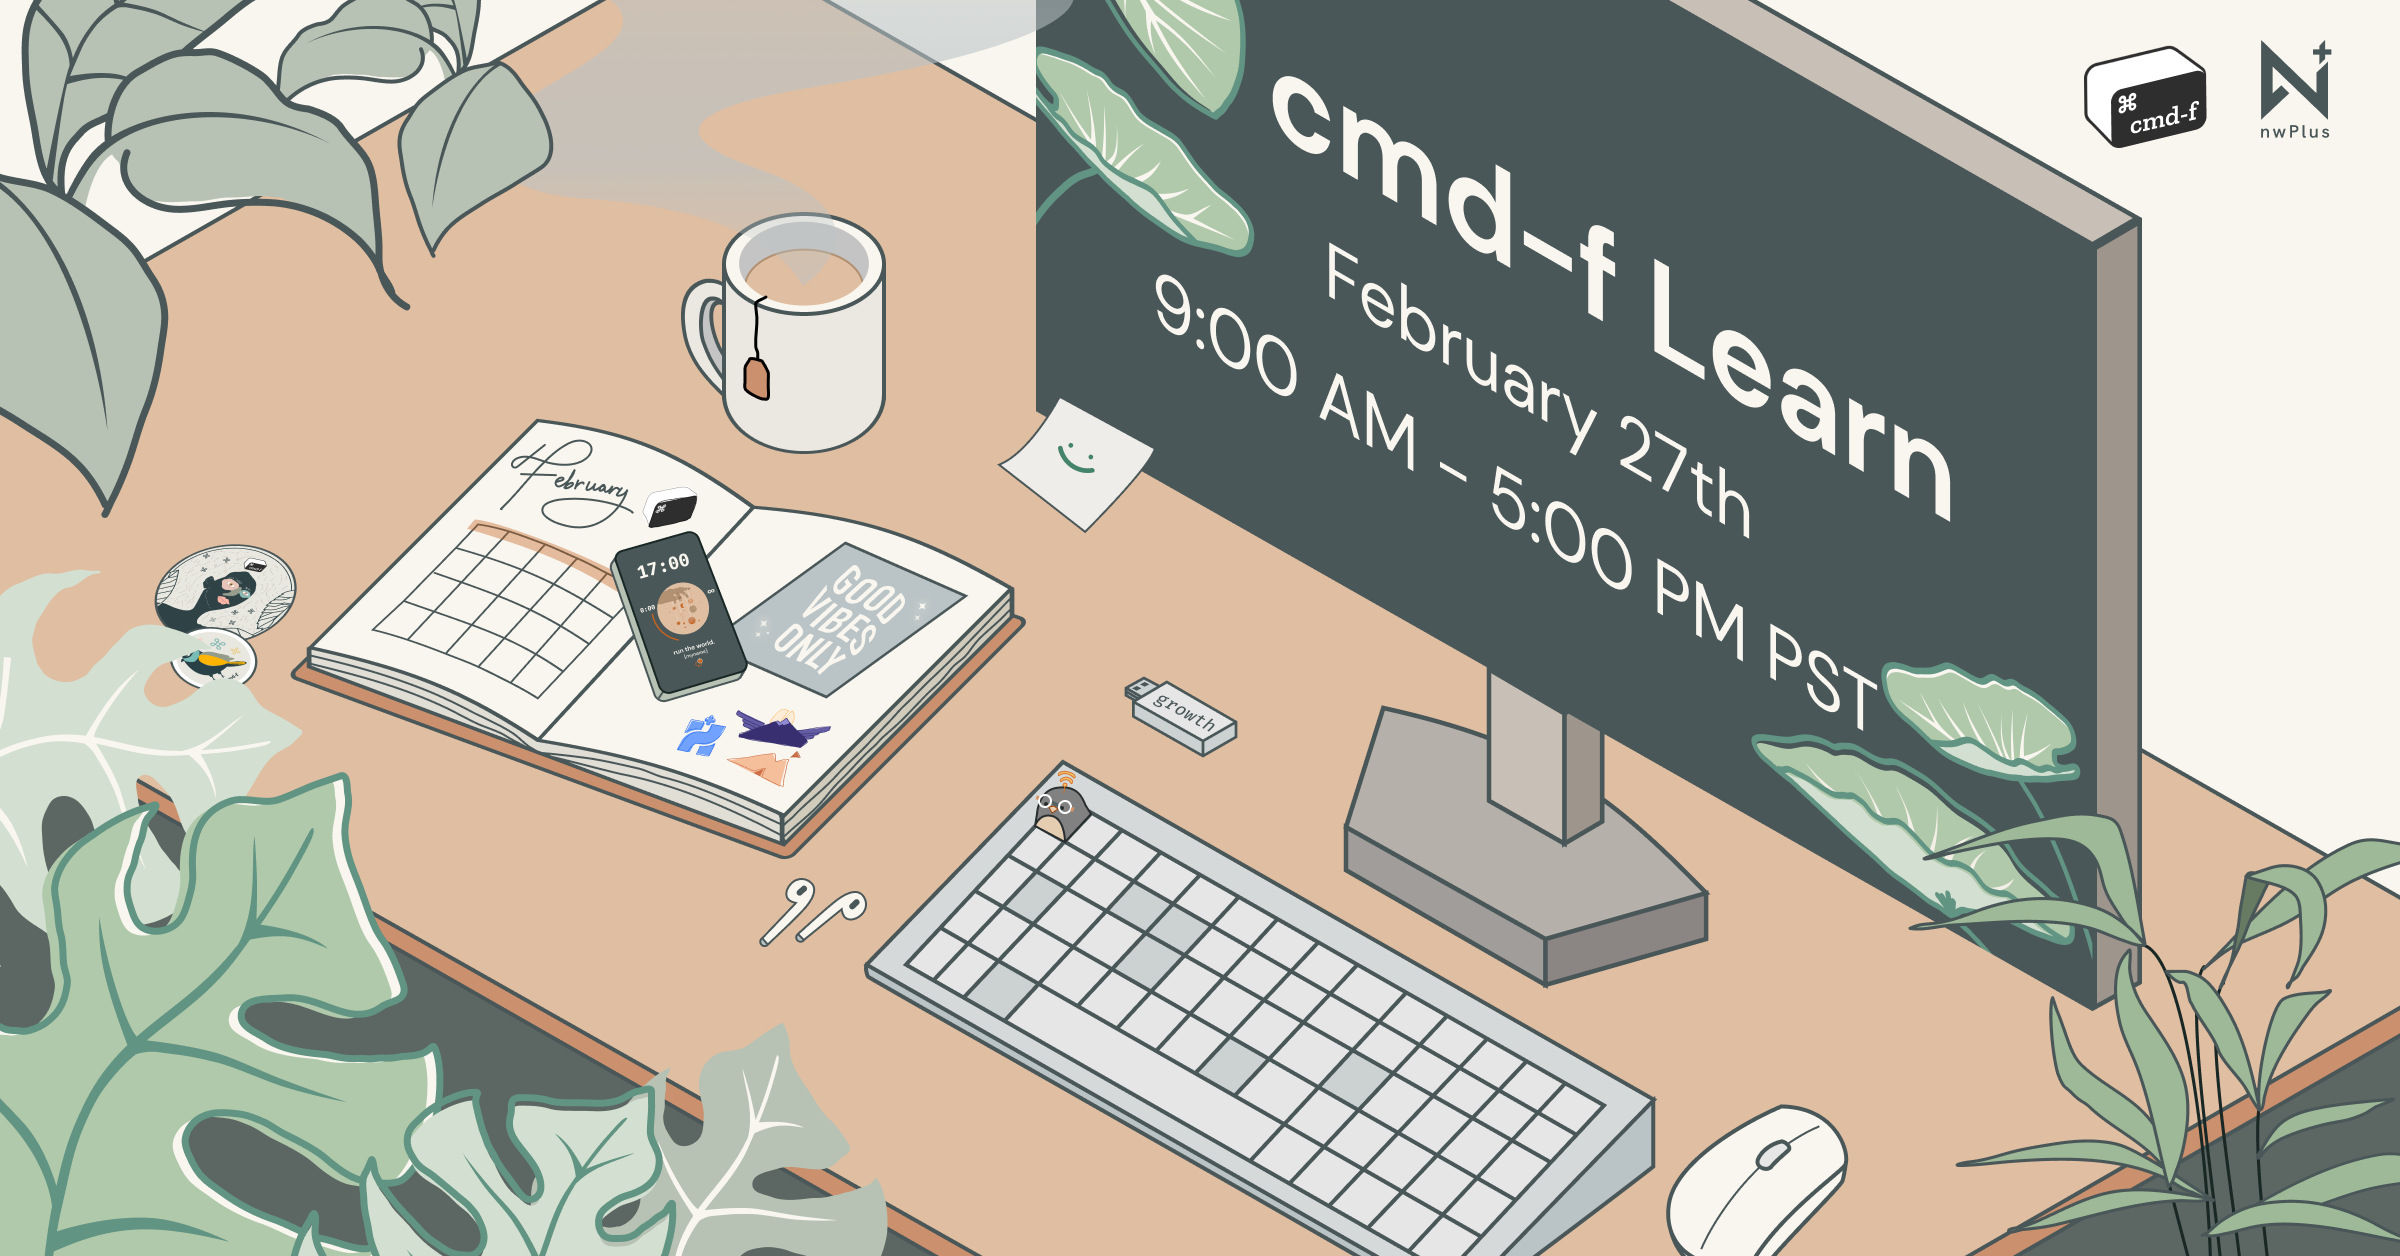 cmd-f Learn launch graphic